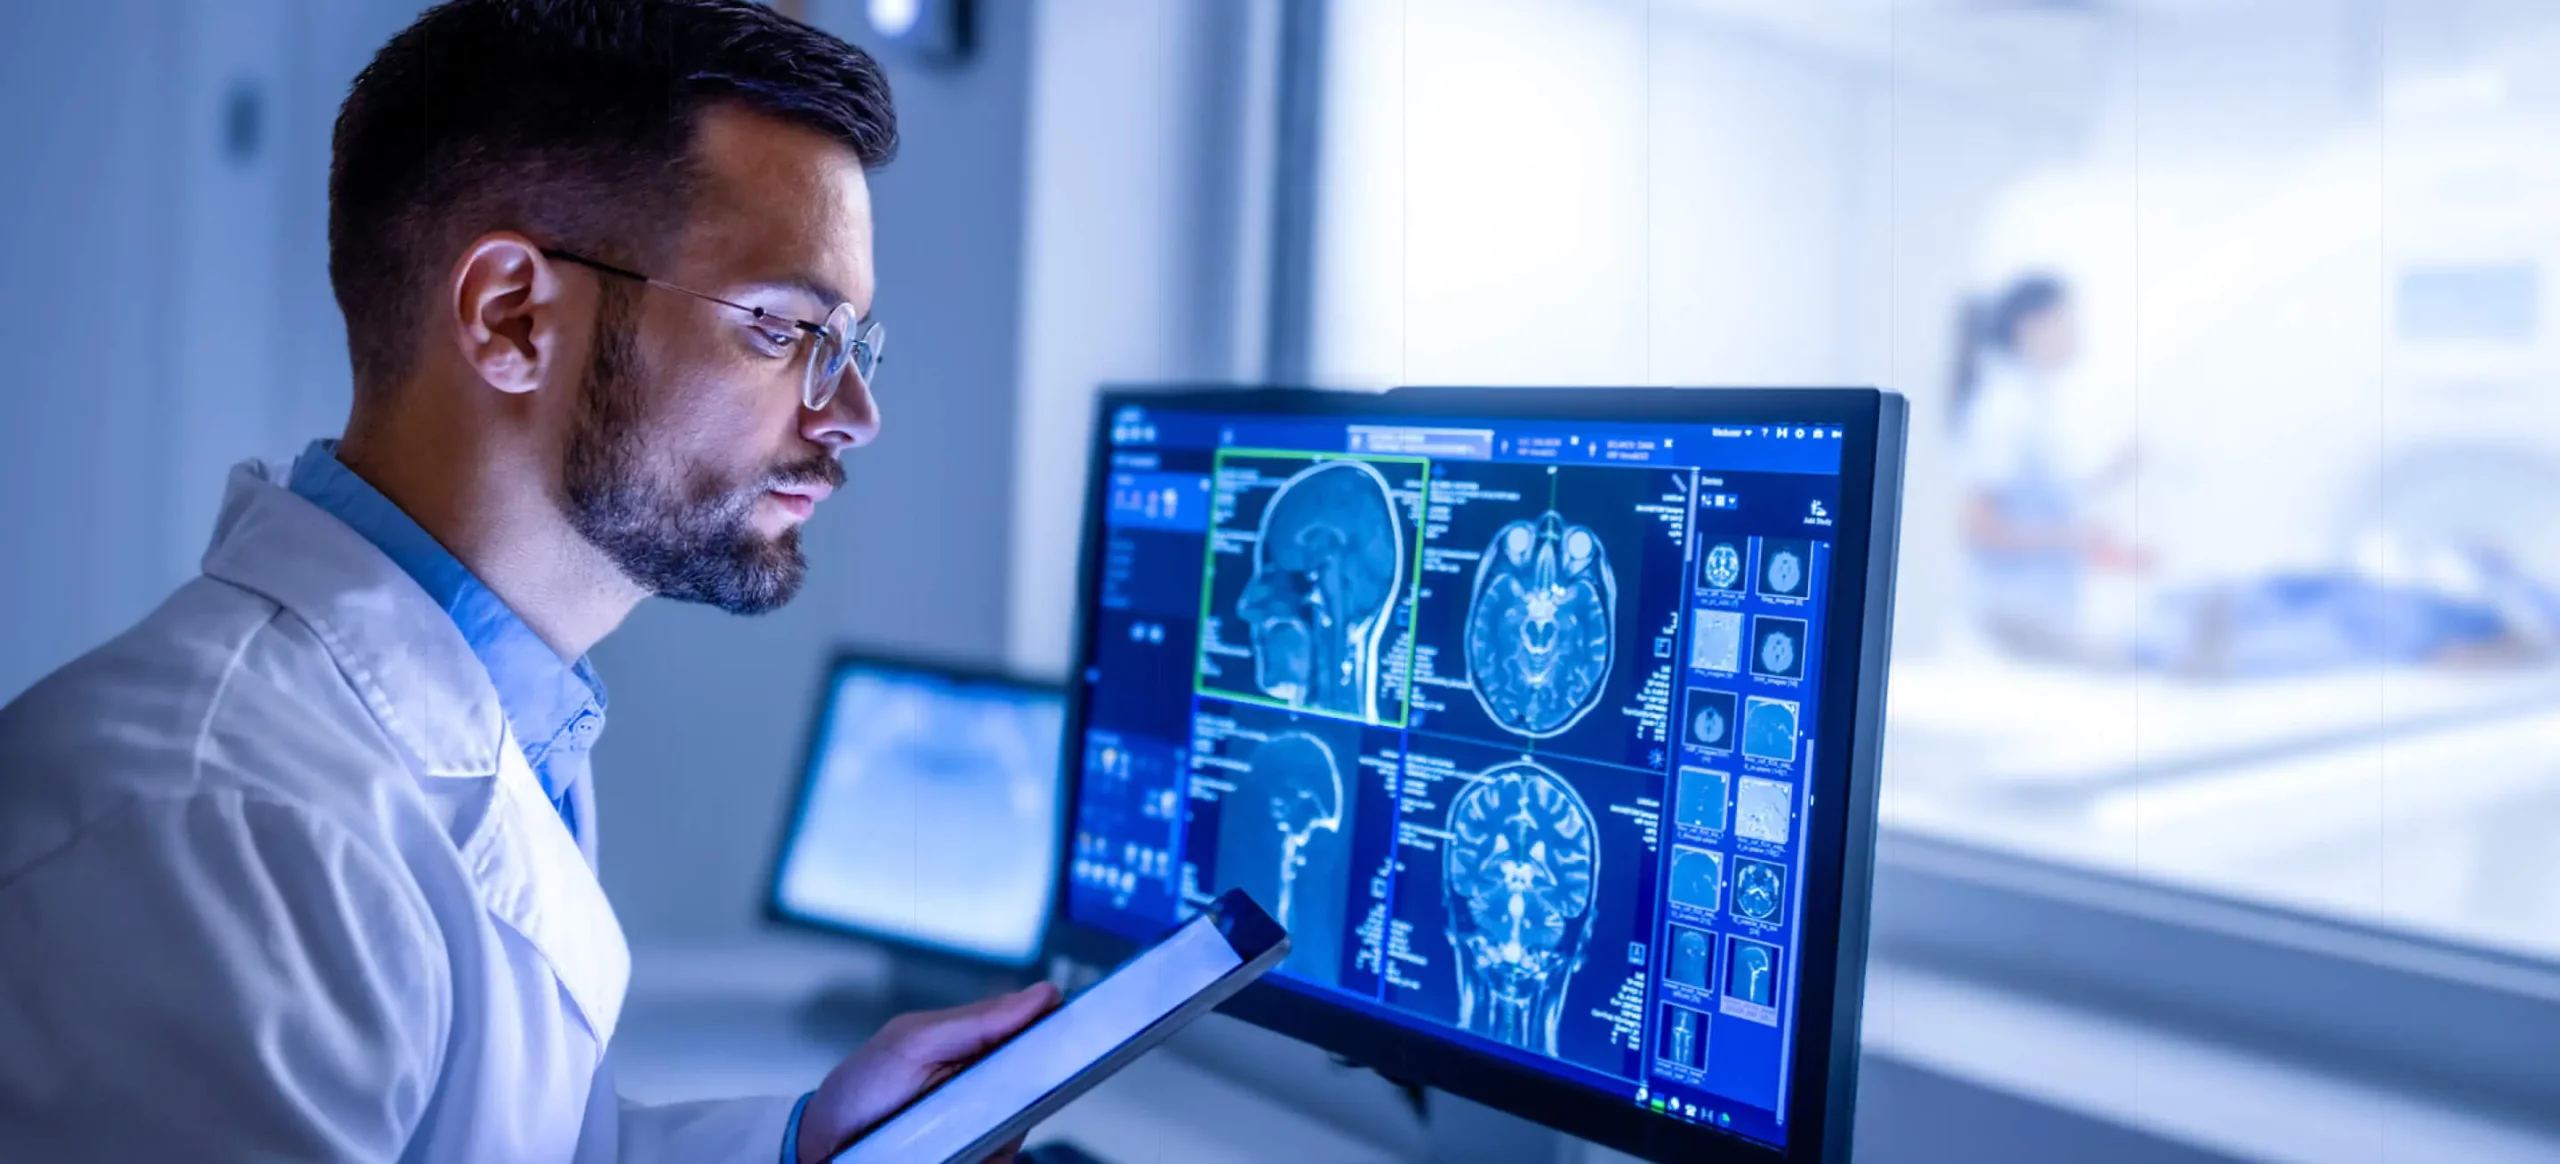 A doctor looks at a tablet while an external monitor shows a brain scan.